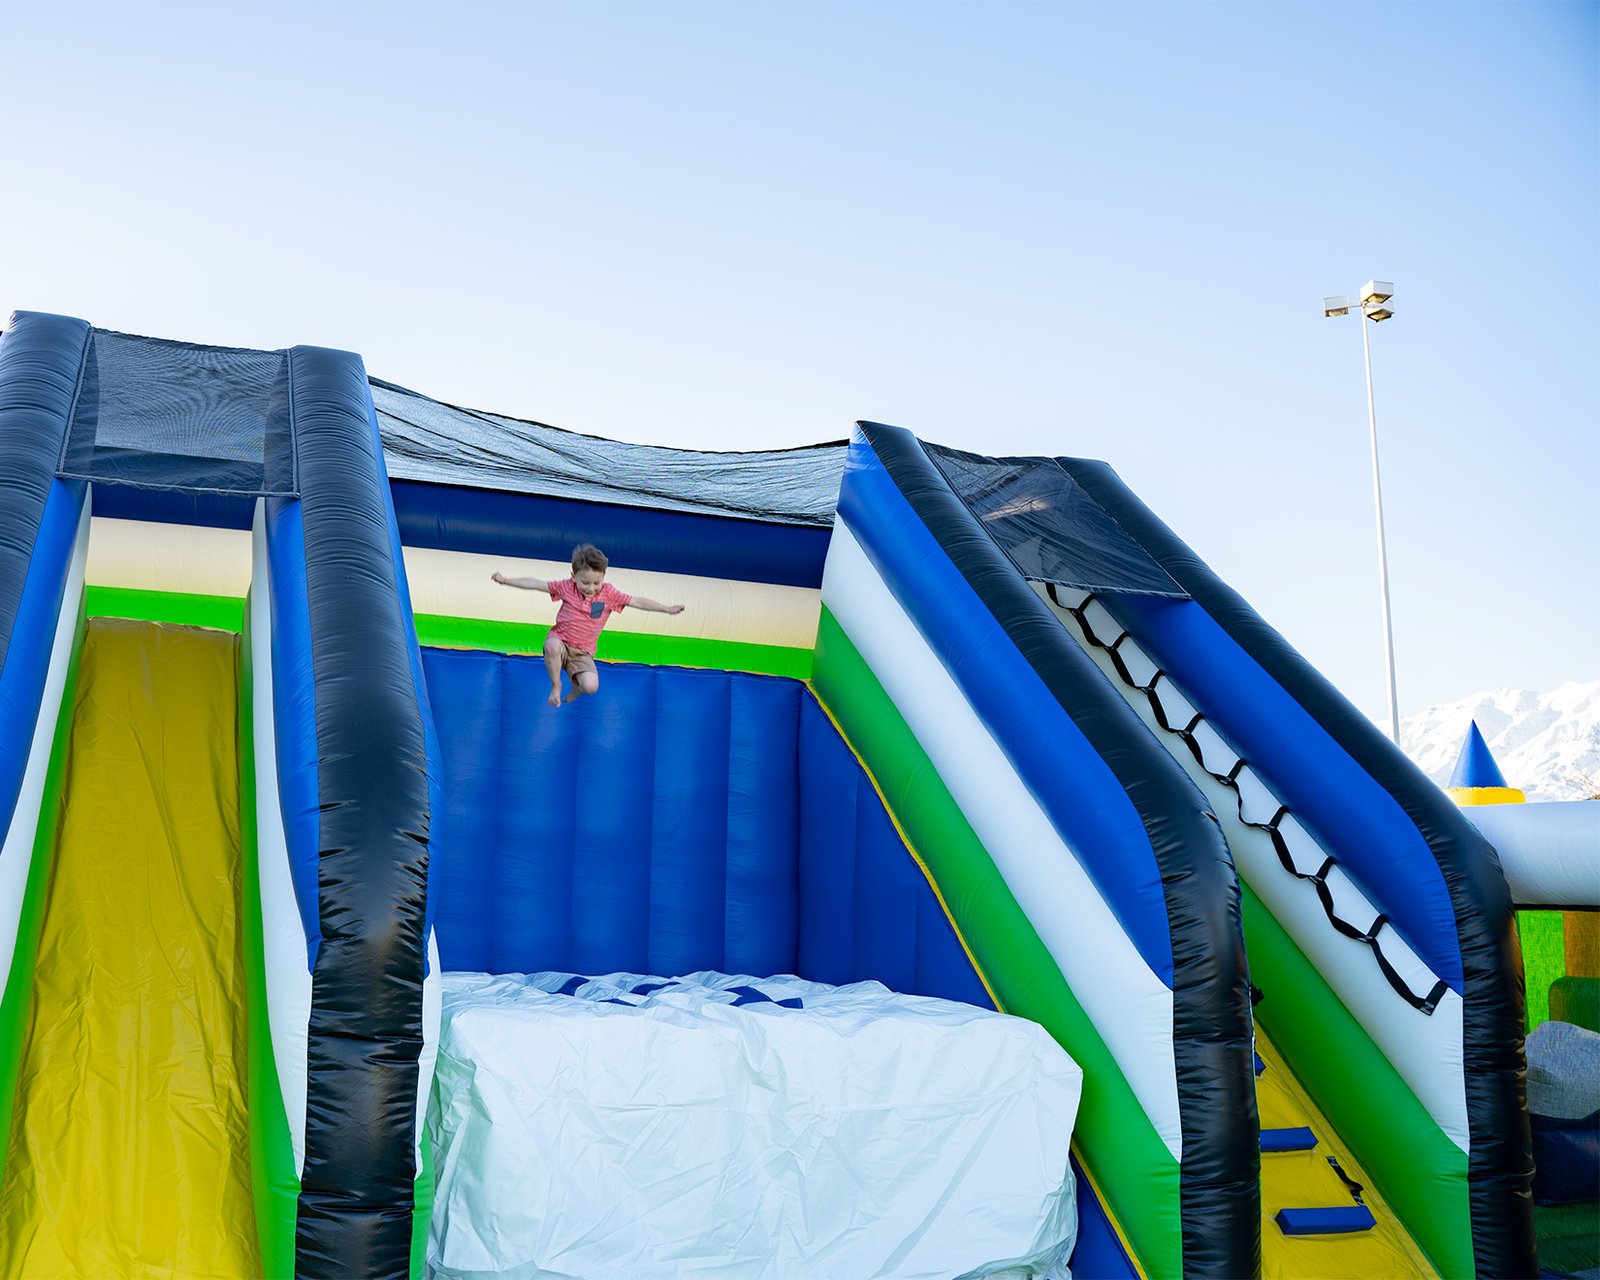 Boy jumping off platform onto a giant air bag at one of the world's largest bounce houses